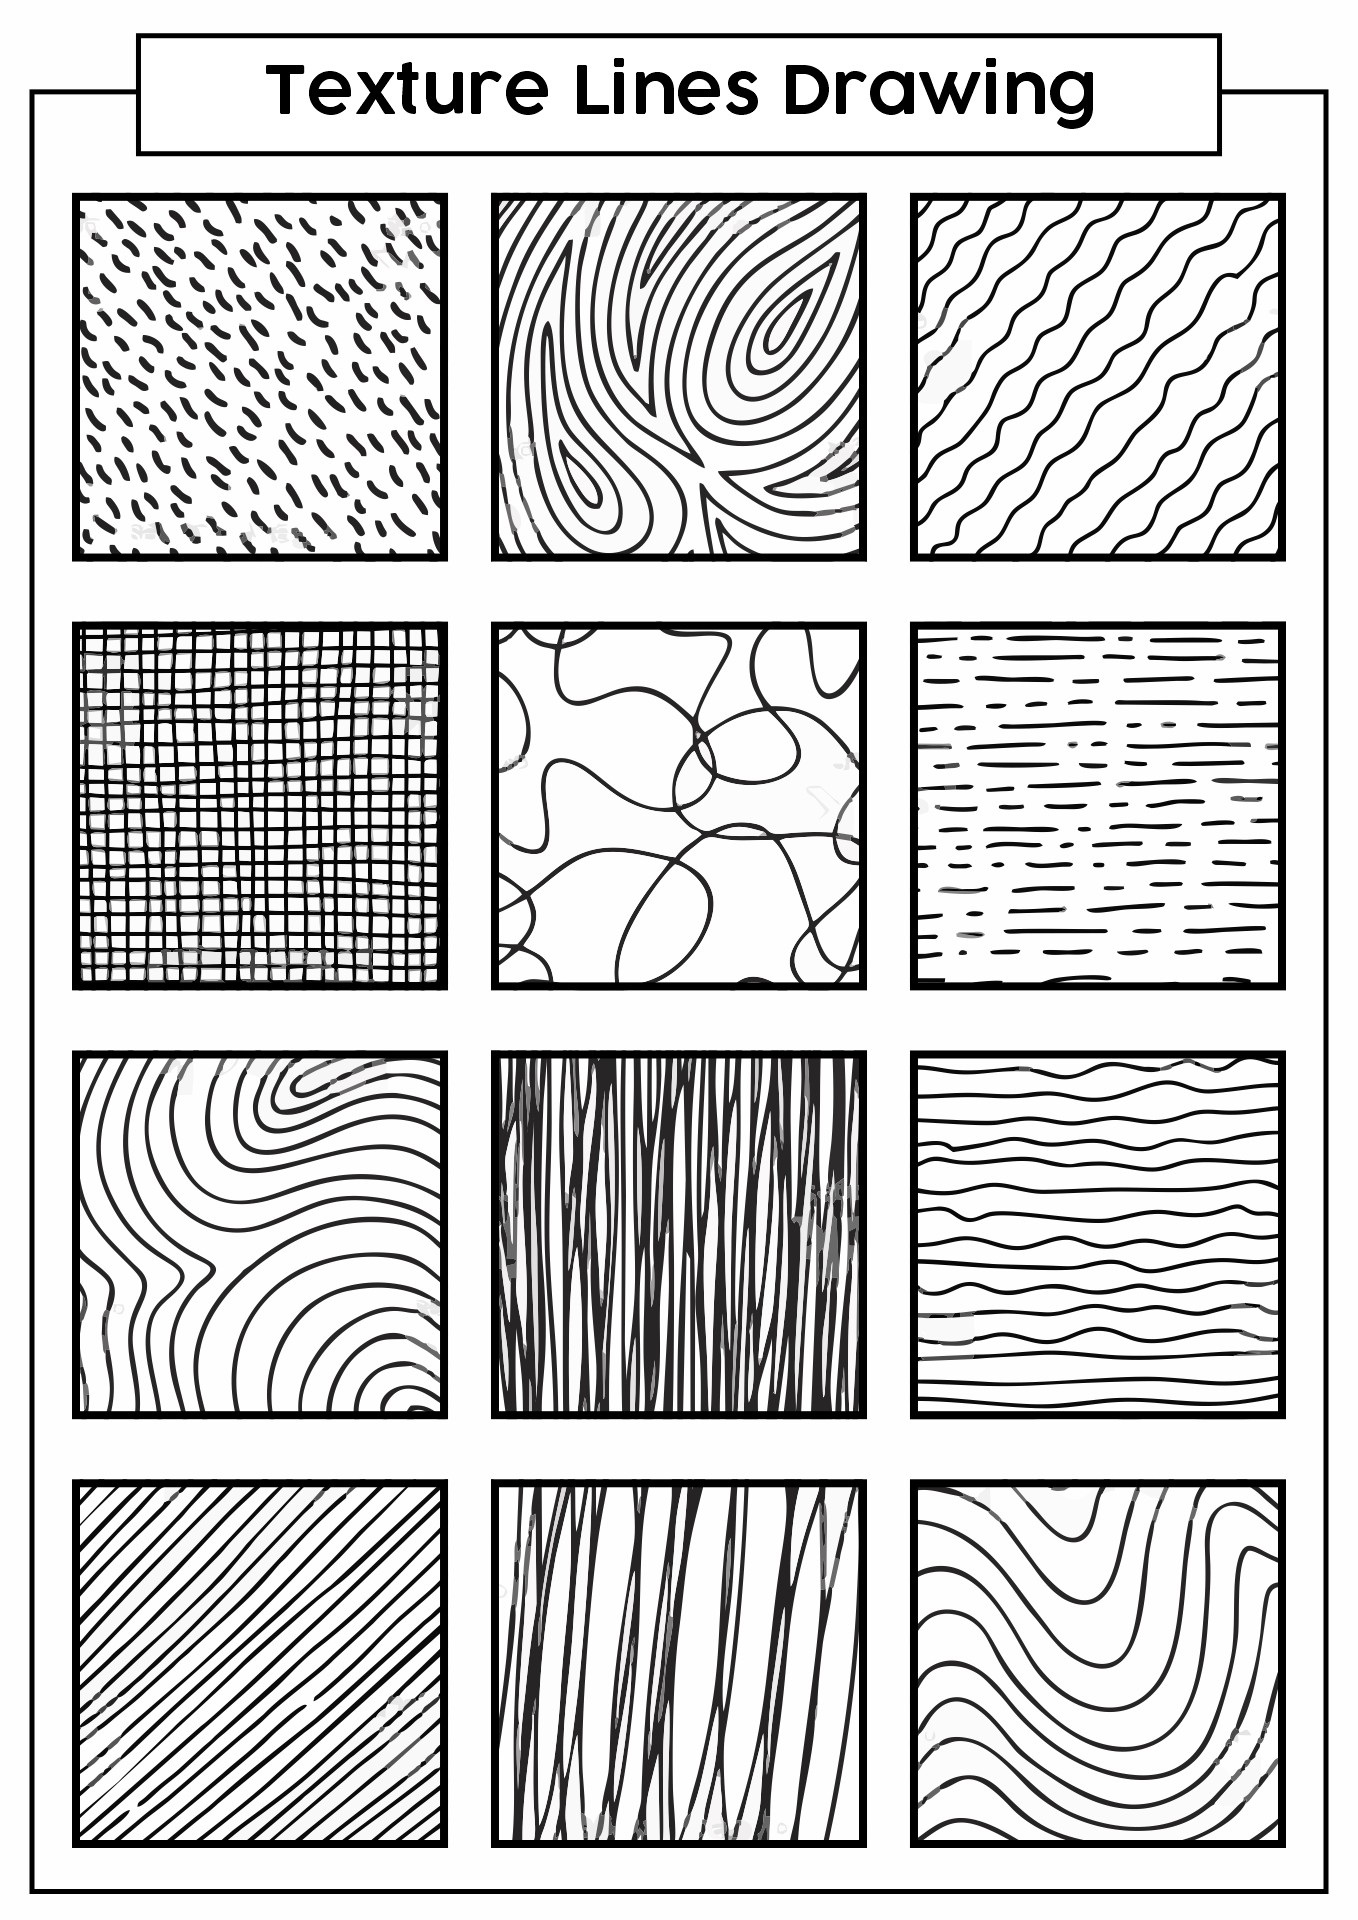 Texture Lines Drawing Image